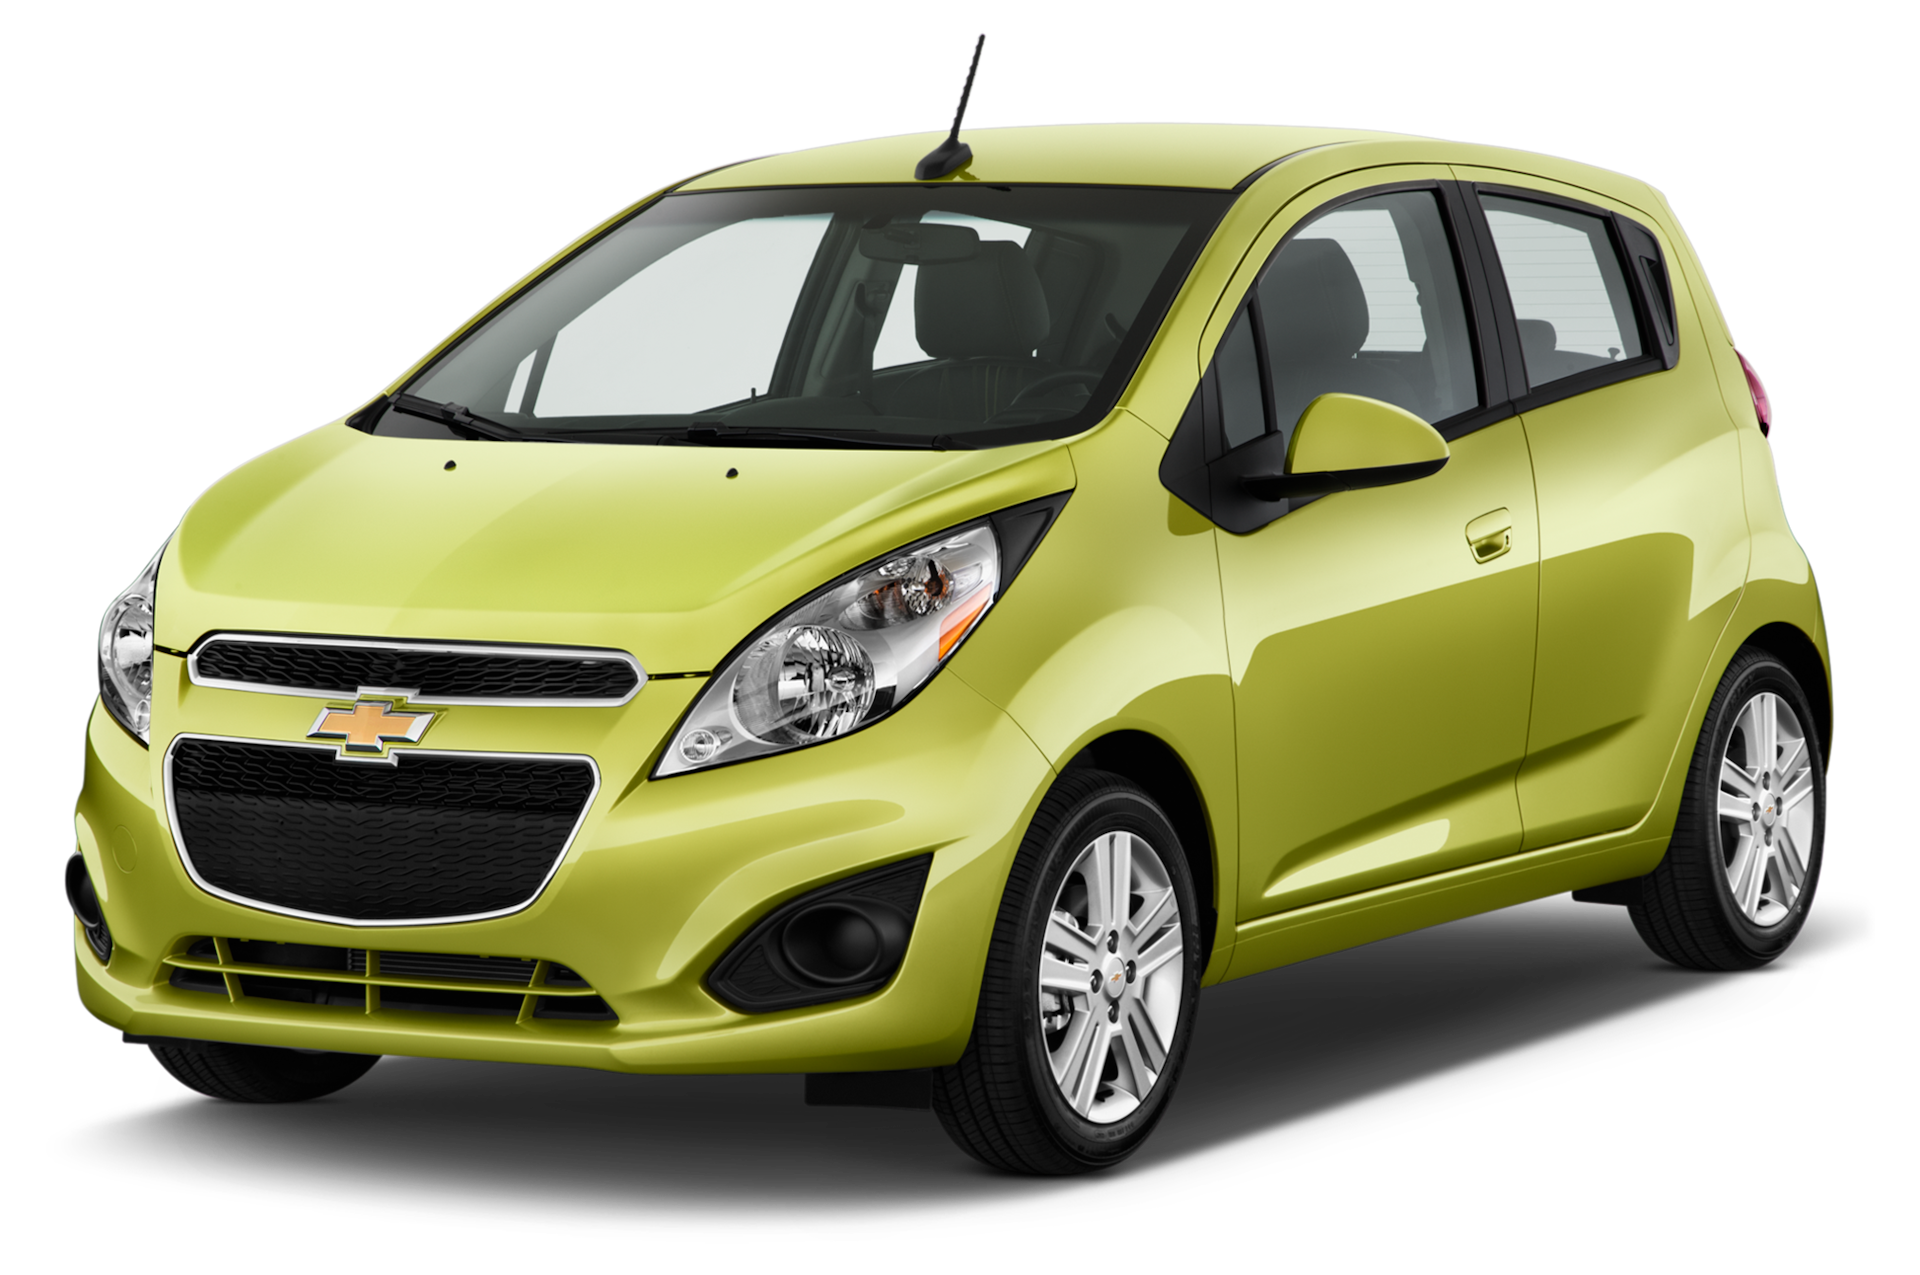 2013 Chevrolet Spark Prices, Reviews, and Photos - MotorTrend